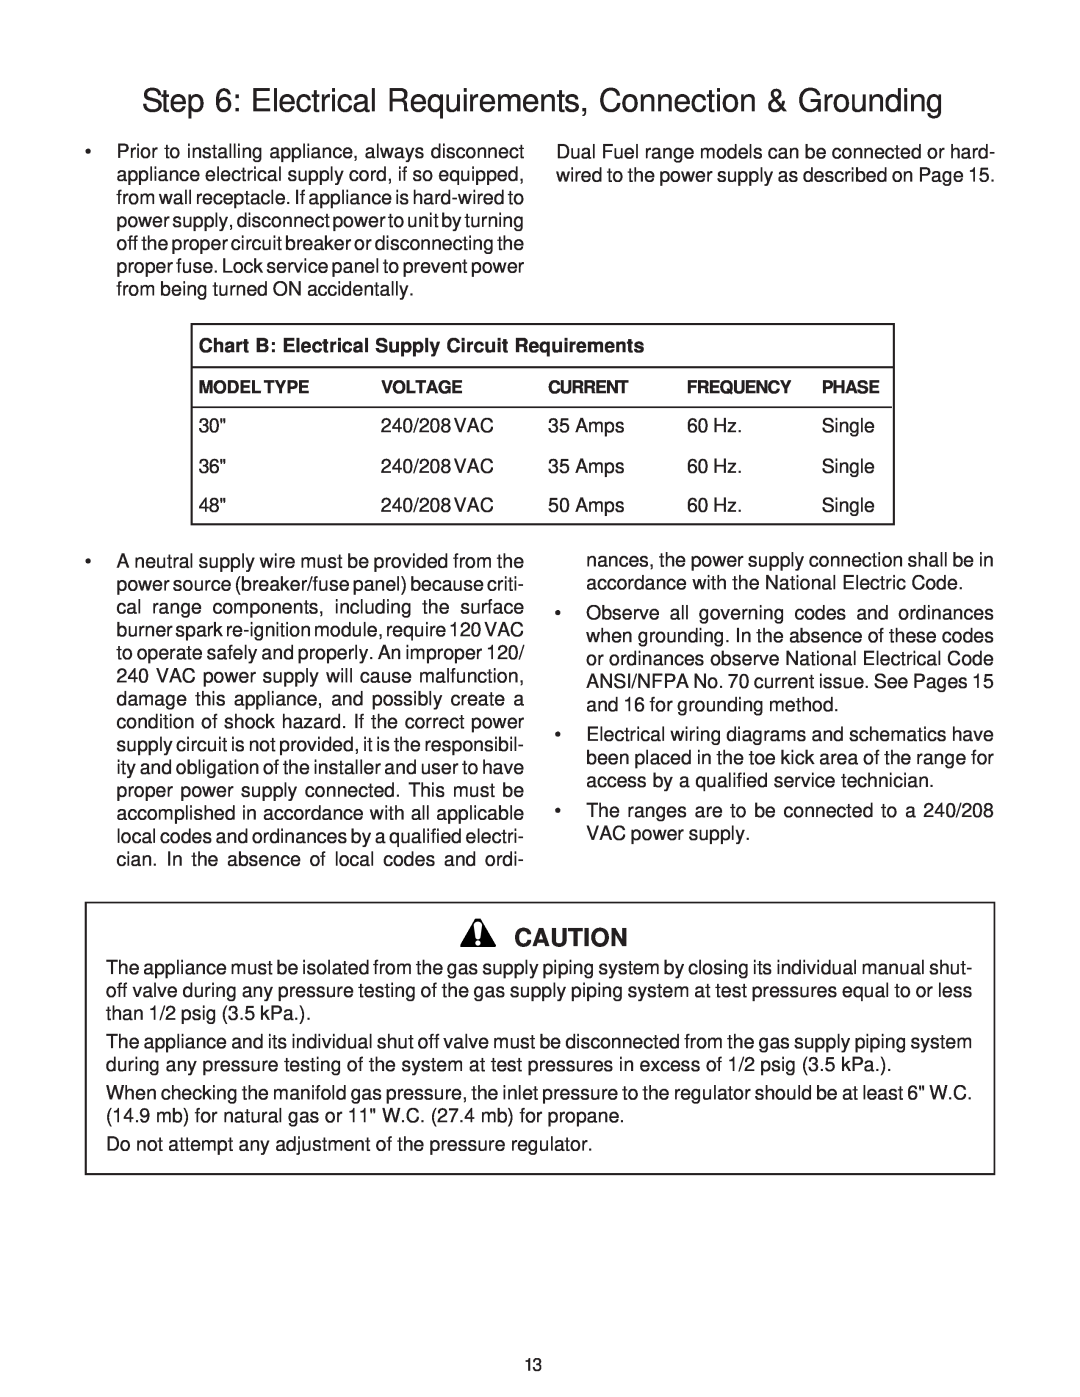 Thermador PD30 installation instructions Chart B Electrical Supply Circuit Requirements 